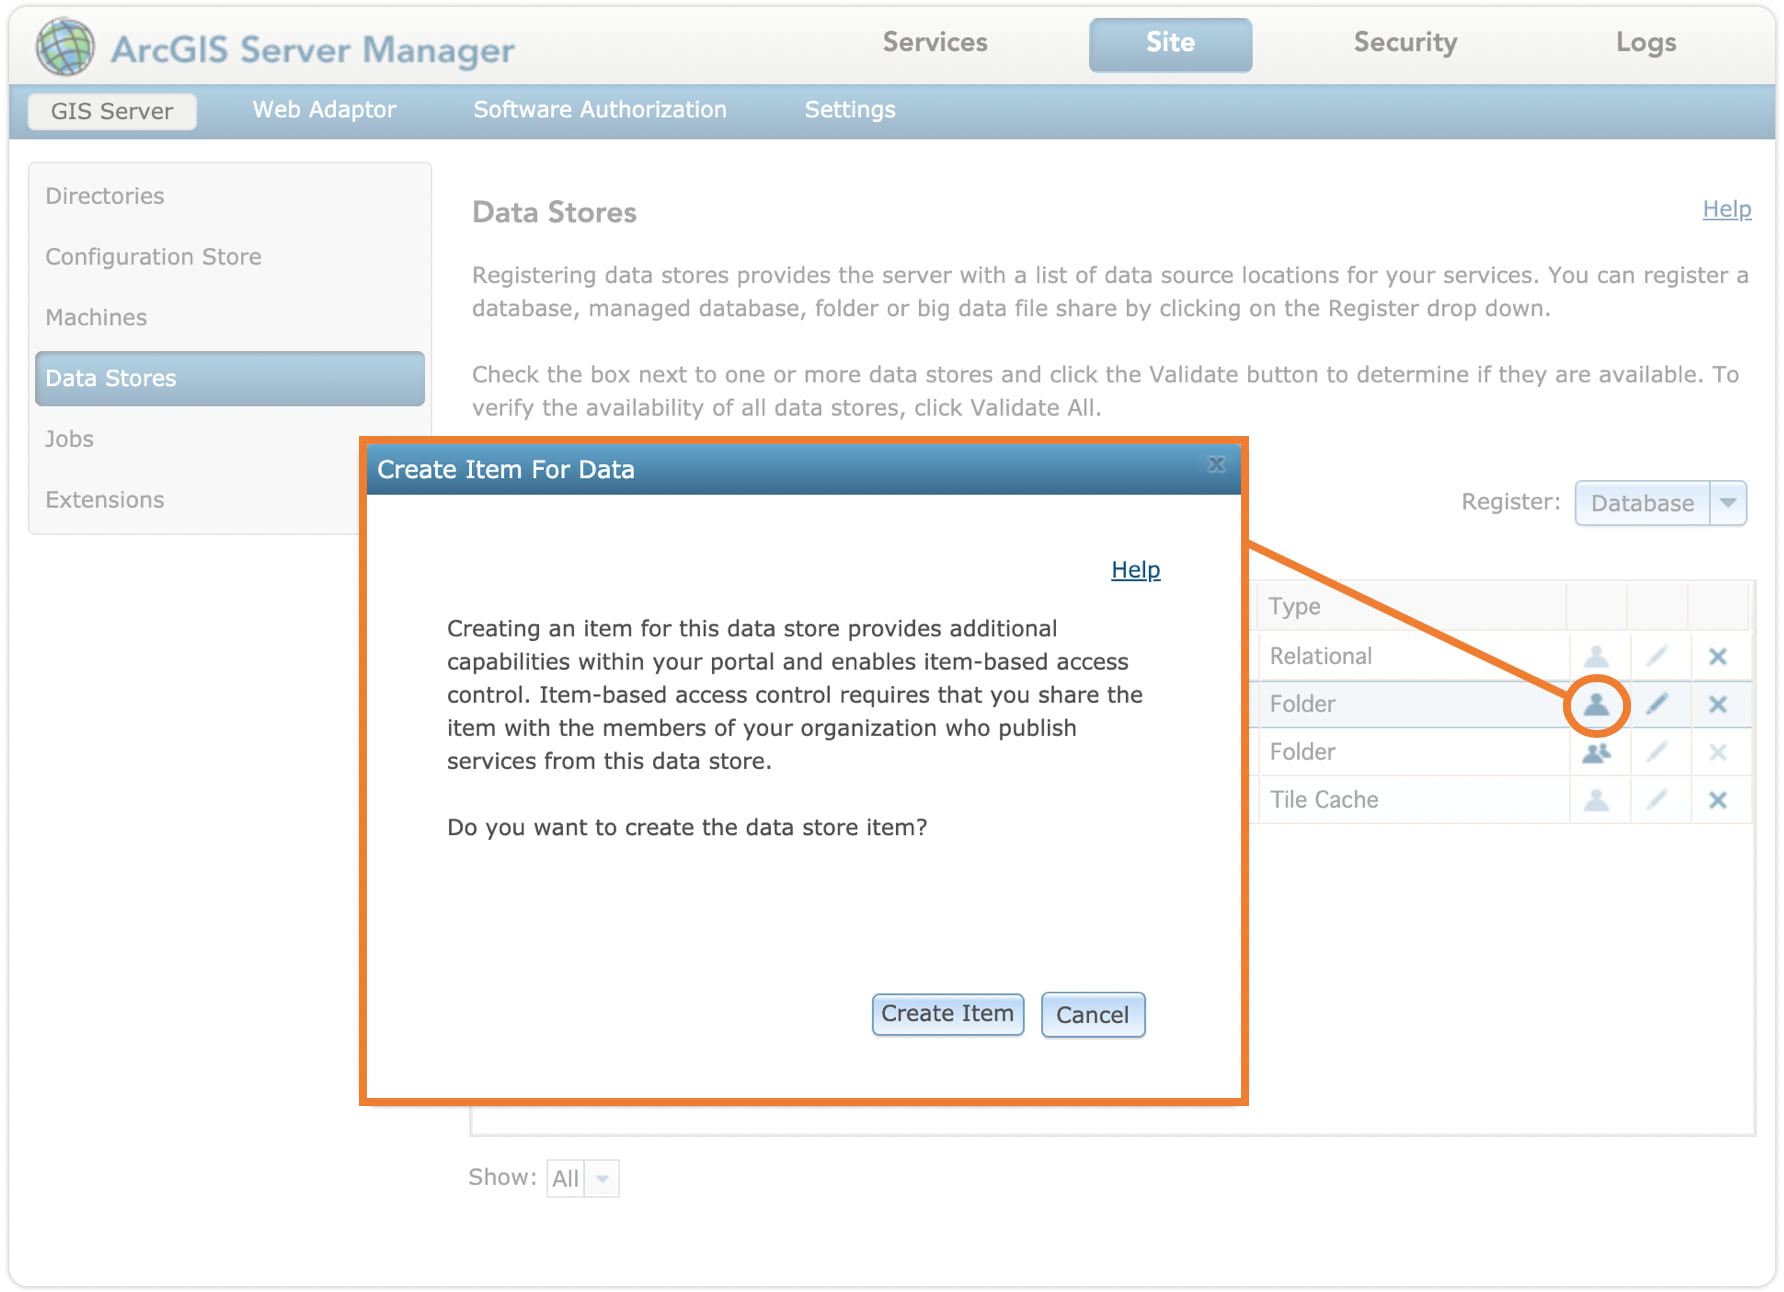 The option in Server Manager to create a data store item from existing folder or database.